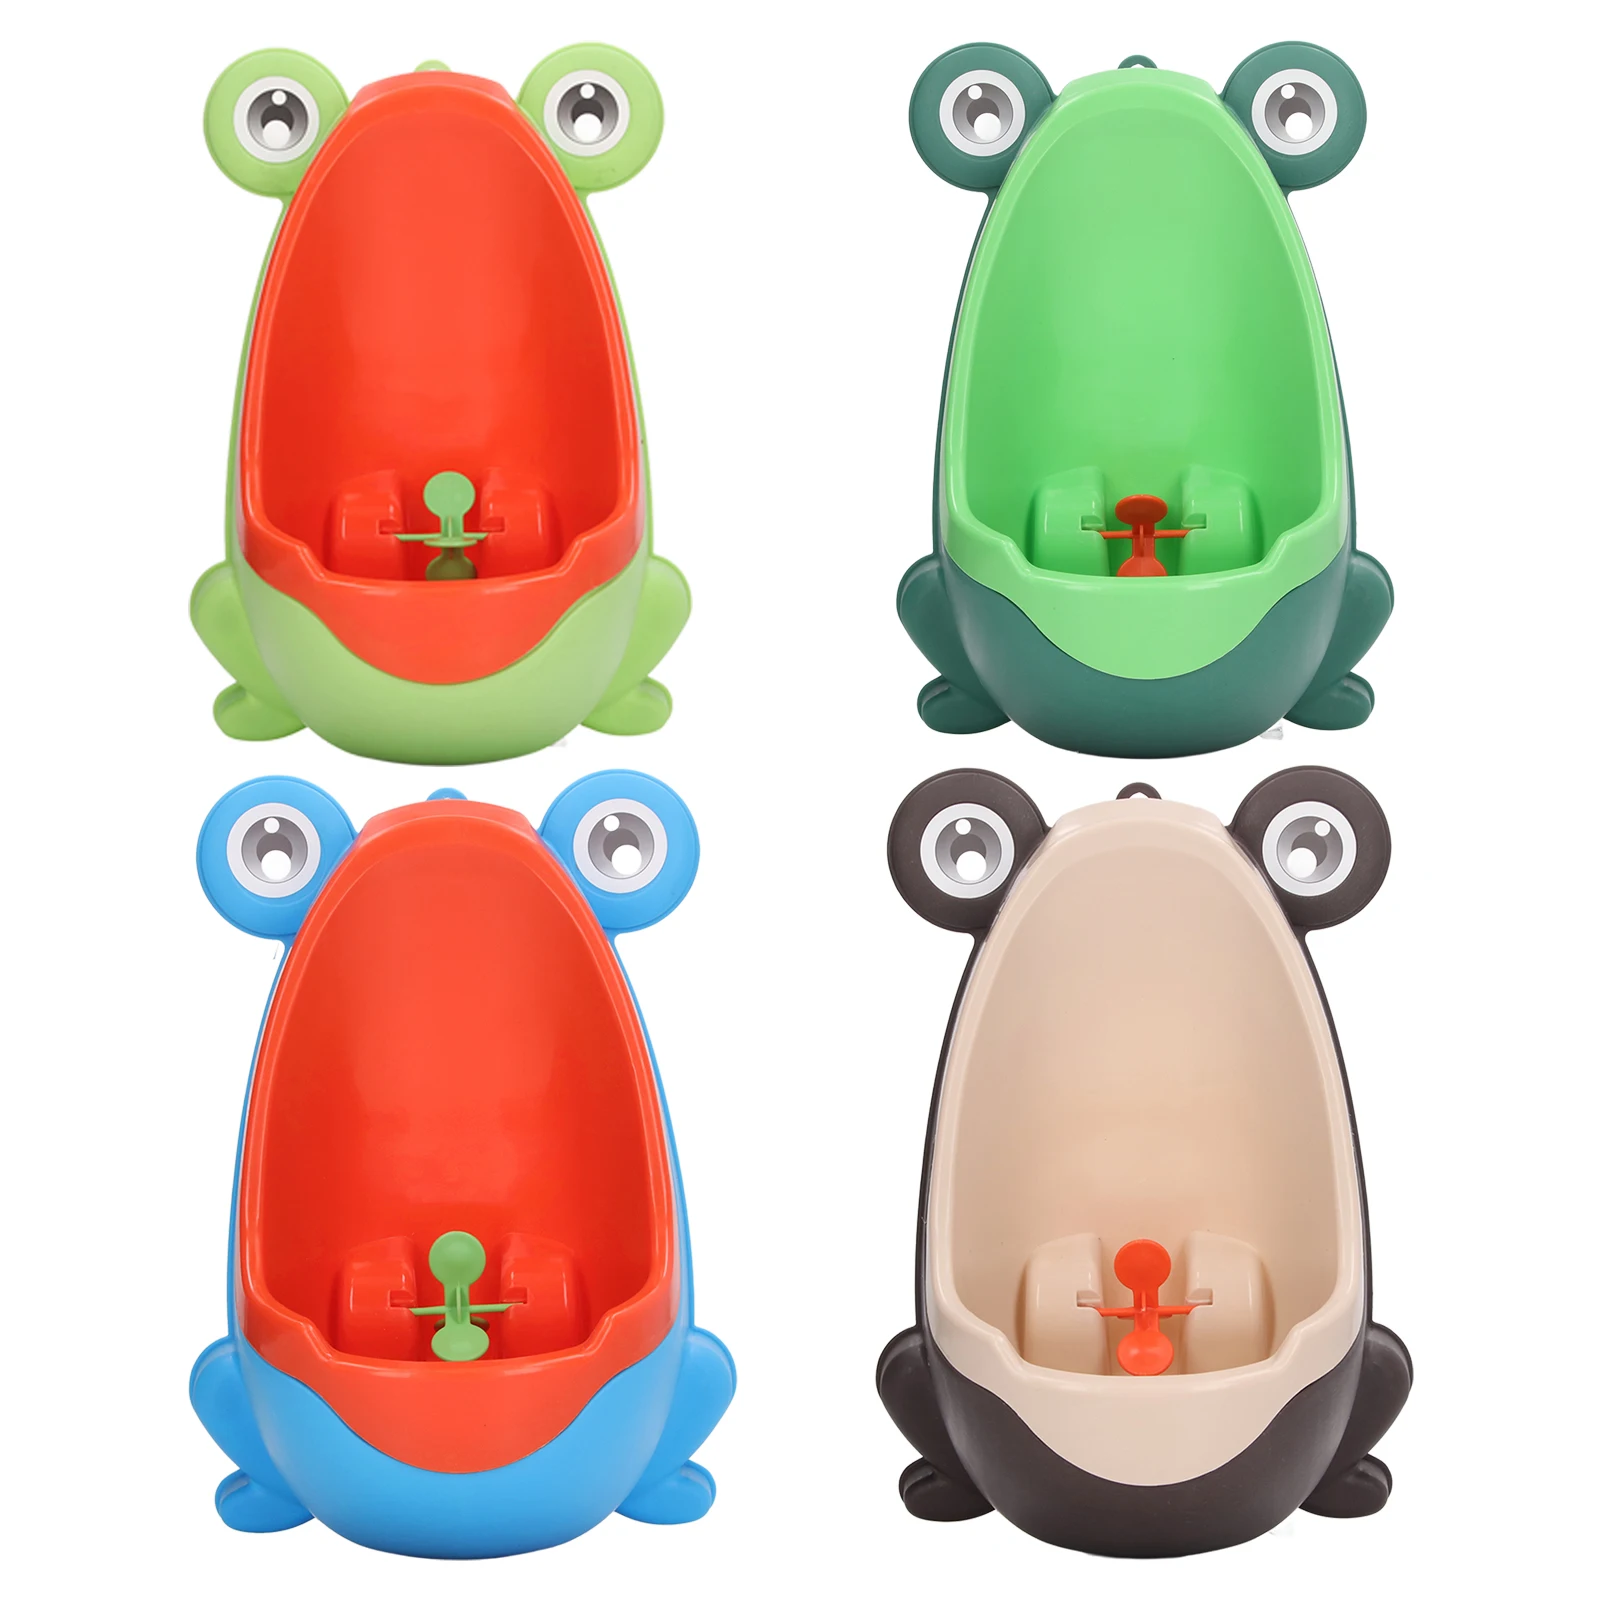 Baby Boys Standing Potty Shape Wall-Mounted Urinals Toilet Training Children Stand Vertical Urinal Potty urinal wall mounted toilet cute cartoon apple urinals child kids training boy pee bathroom portable potty travel toddler